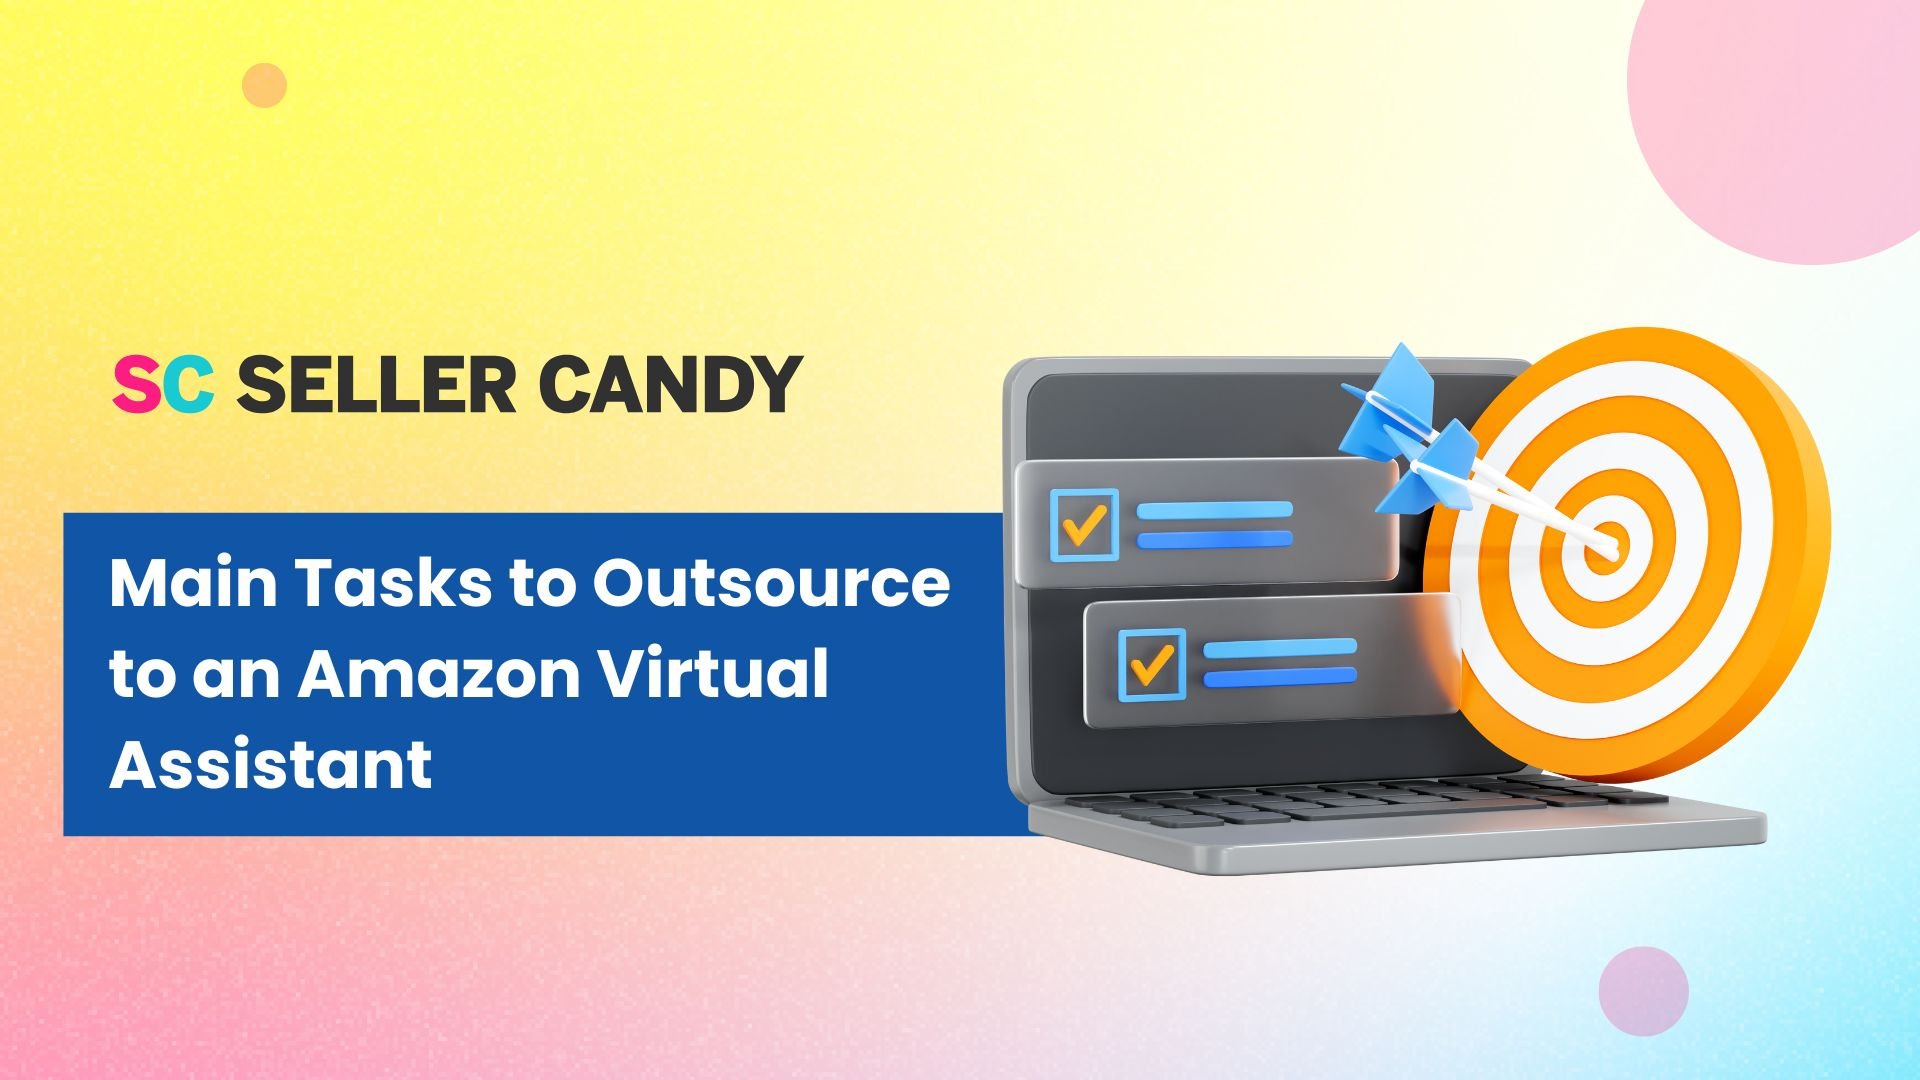 Main Tasks to Outsource to an Amazon Virtual Assistant